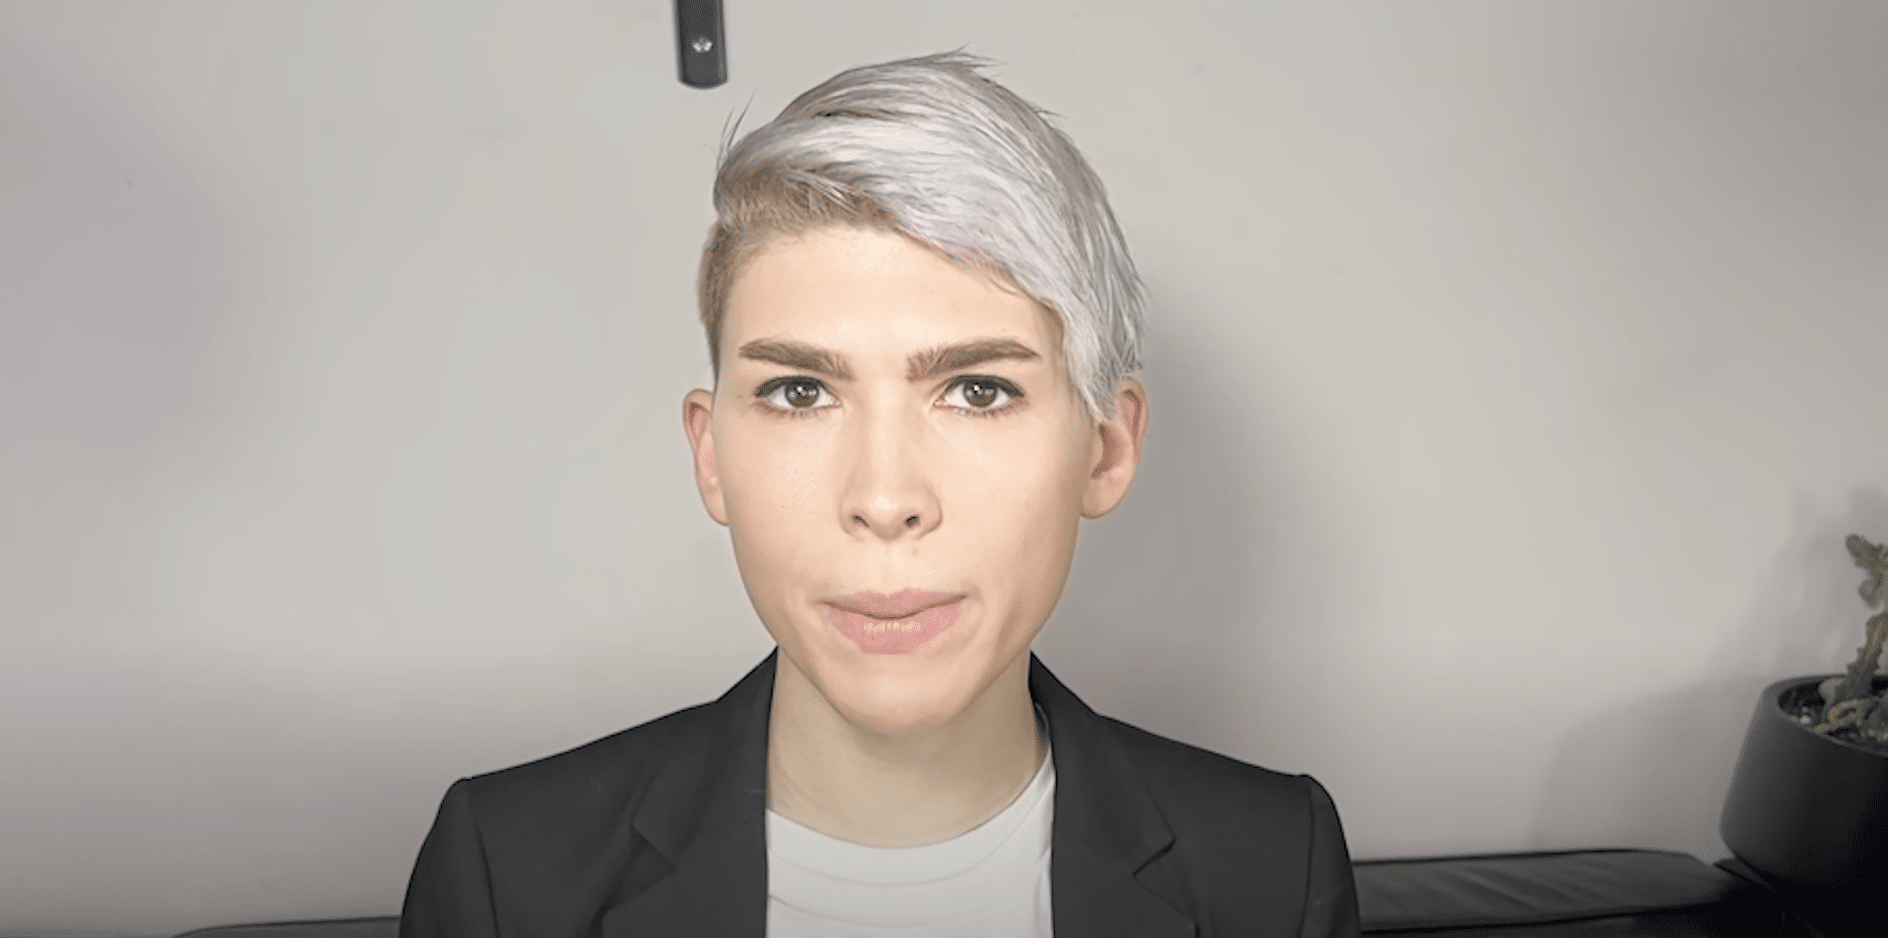 Self-described ‘queer’ and ‘transgender’ boasts about illegally providing minors gender-transition prescriptions without facing any legal consequences